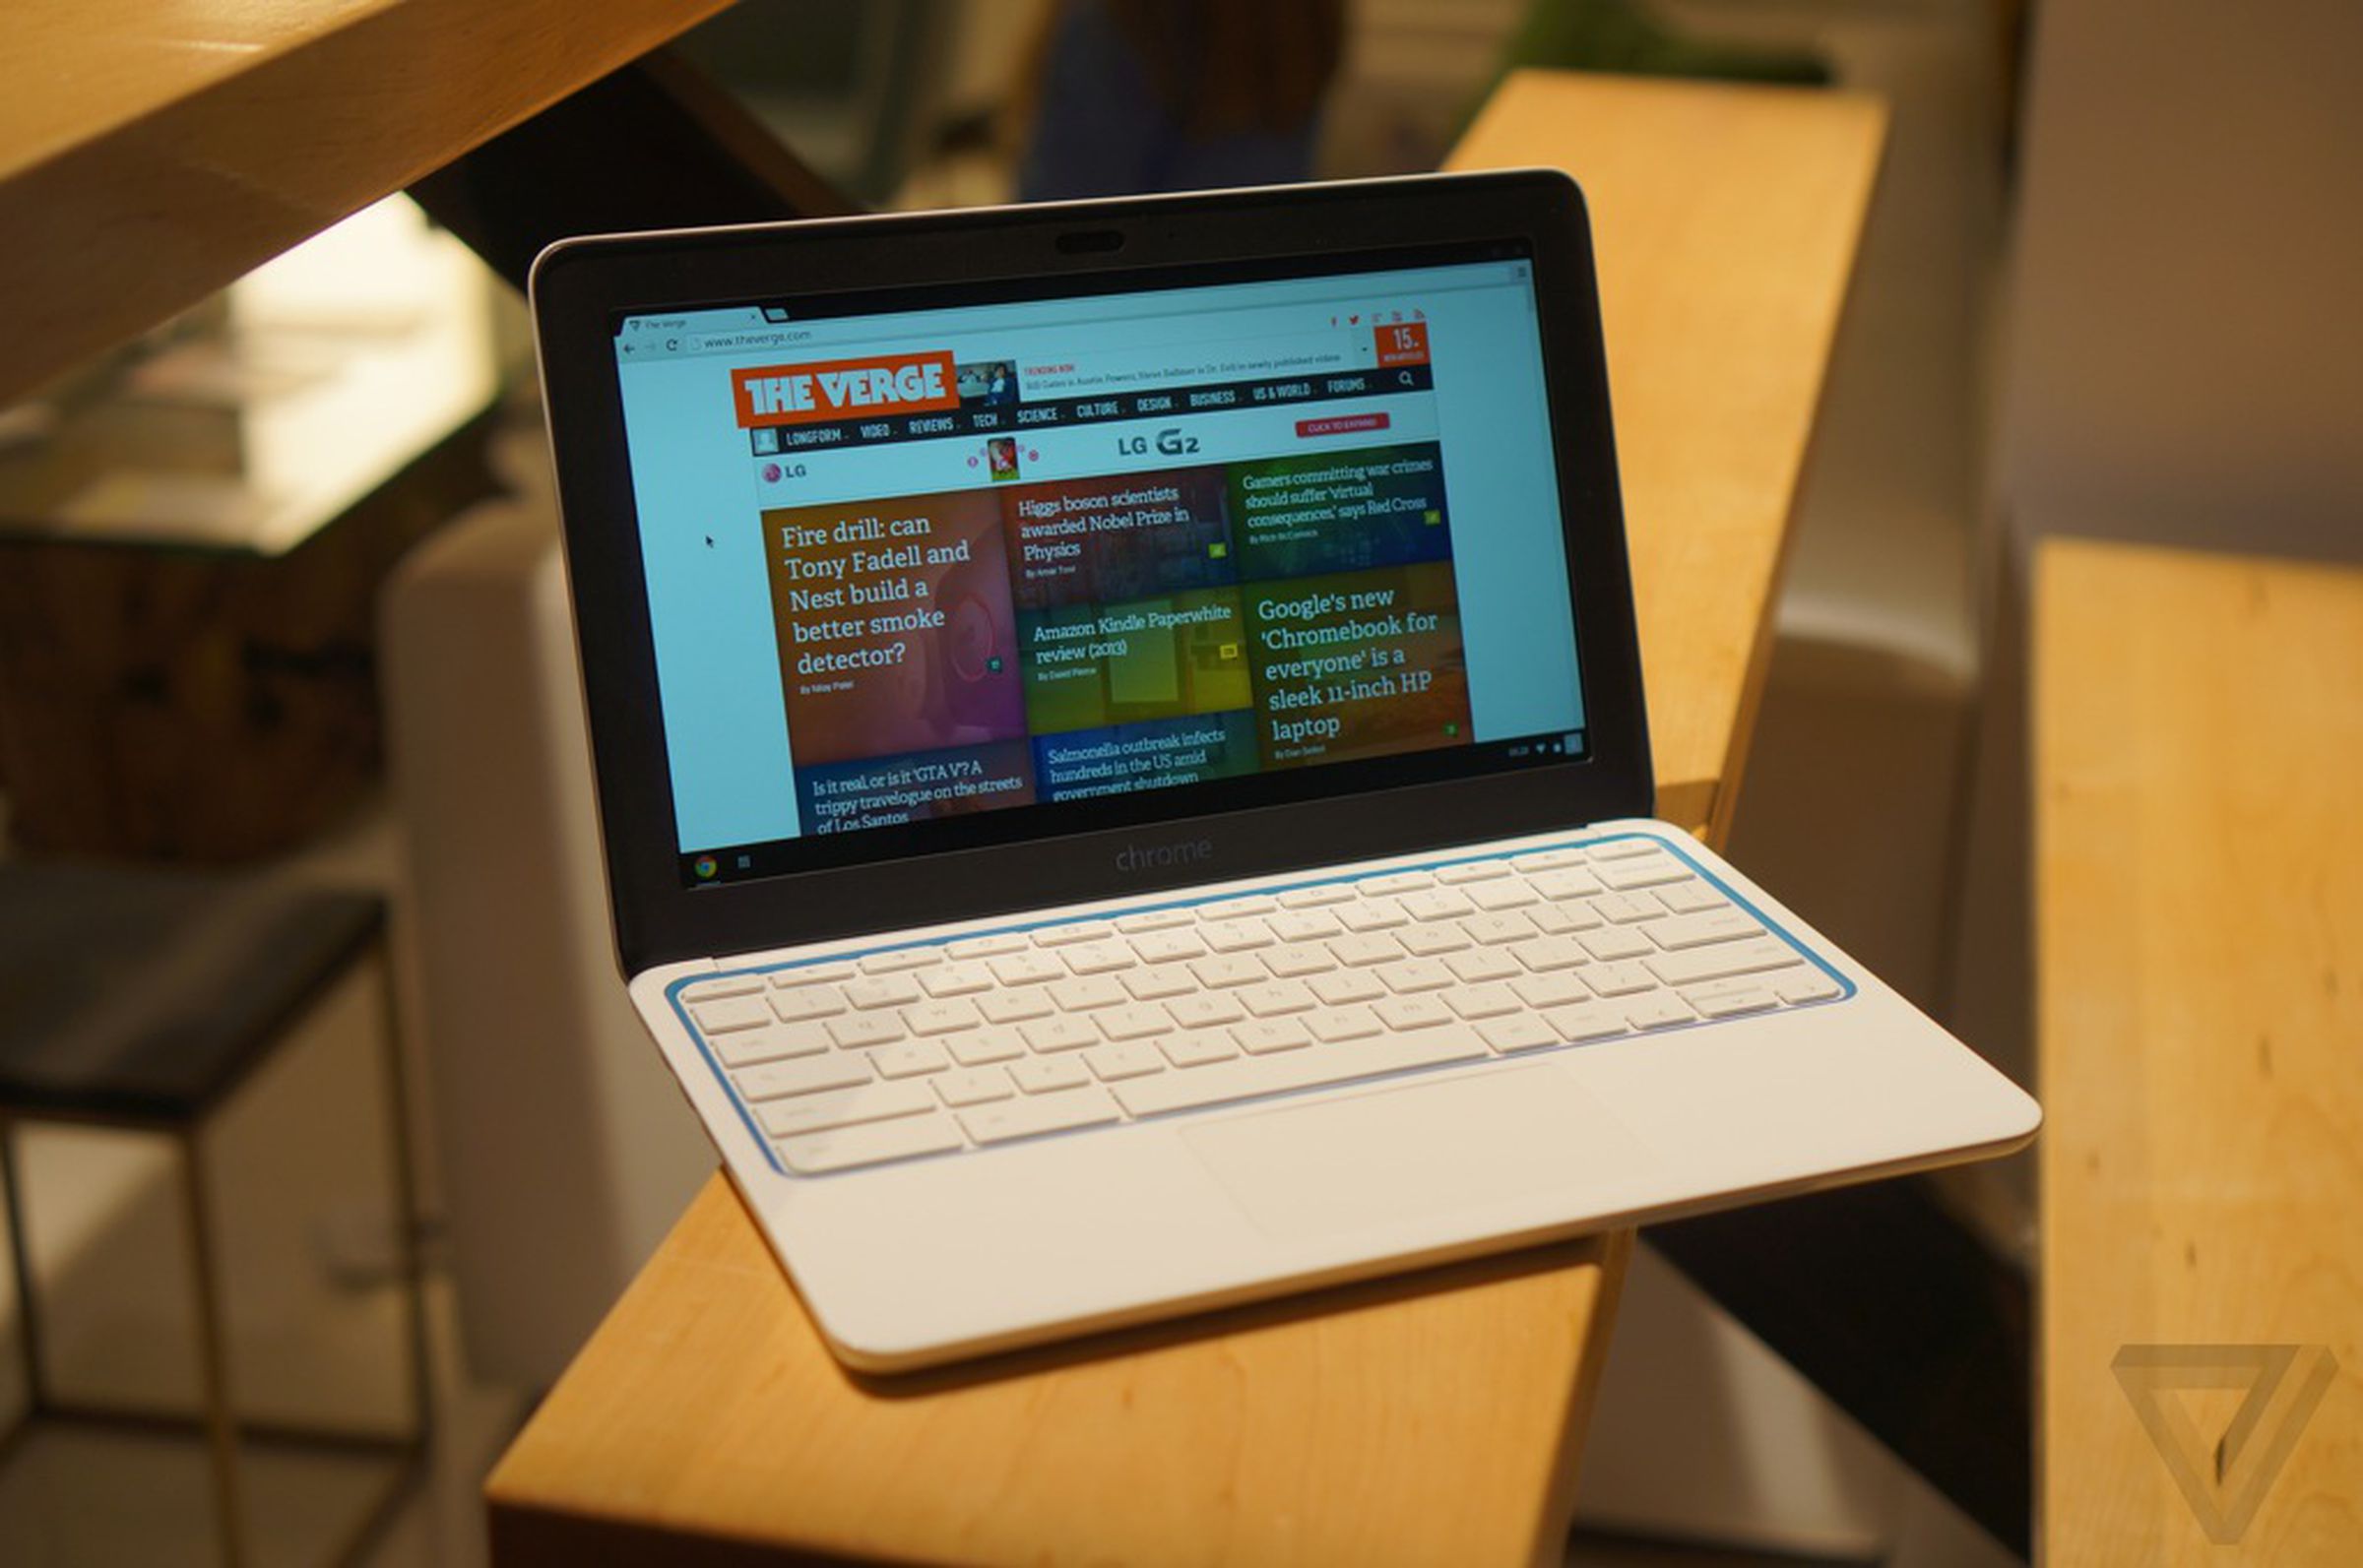 HP Chromebook 11 hands-on pictures